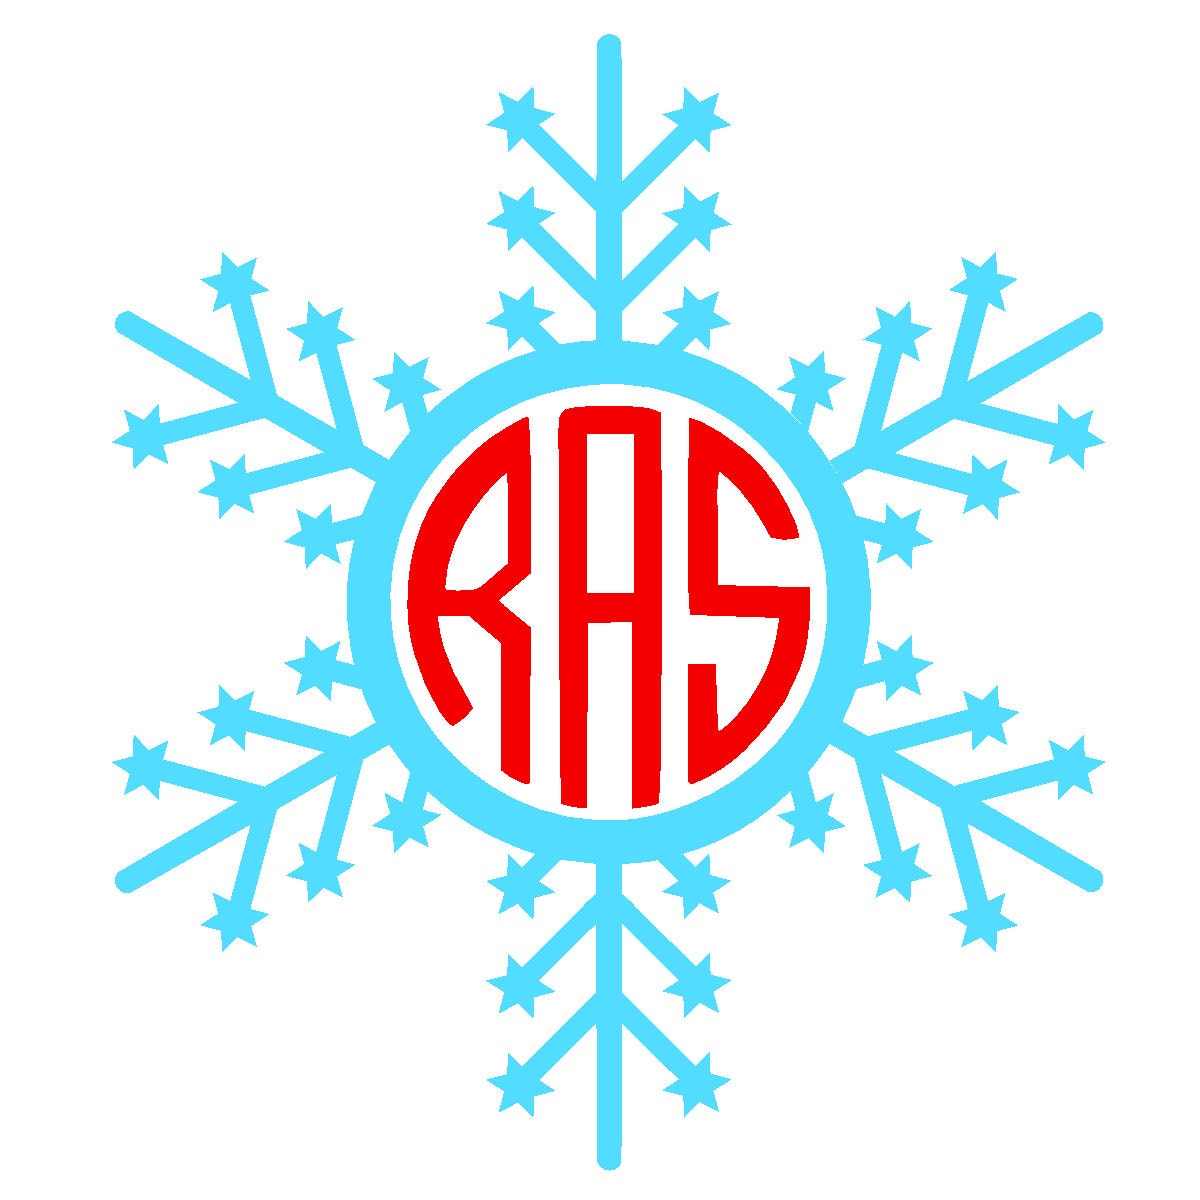 Download Snowflake monogram frame 2 SVG and Silhouette Studio cutting